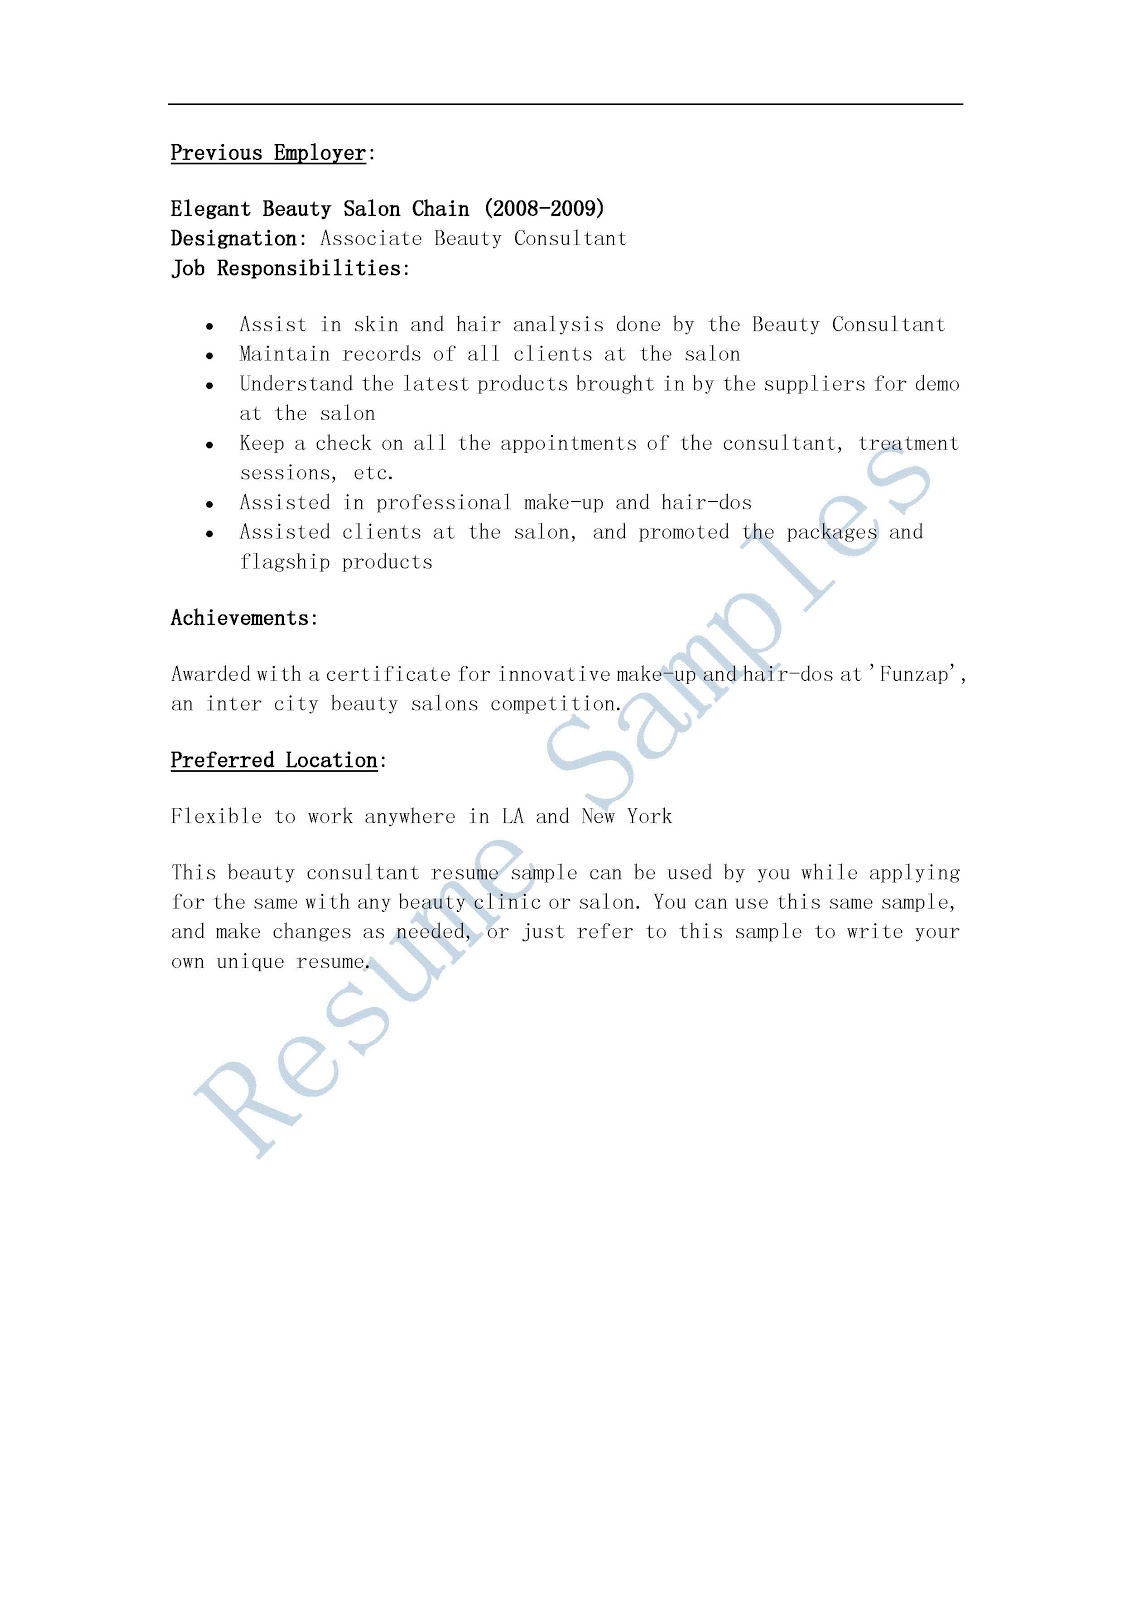 Government of canada resume examples